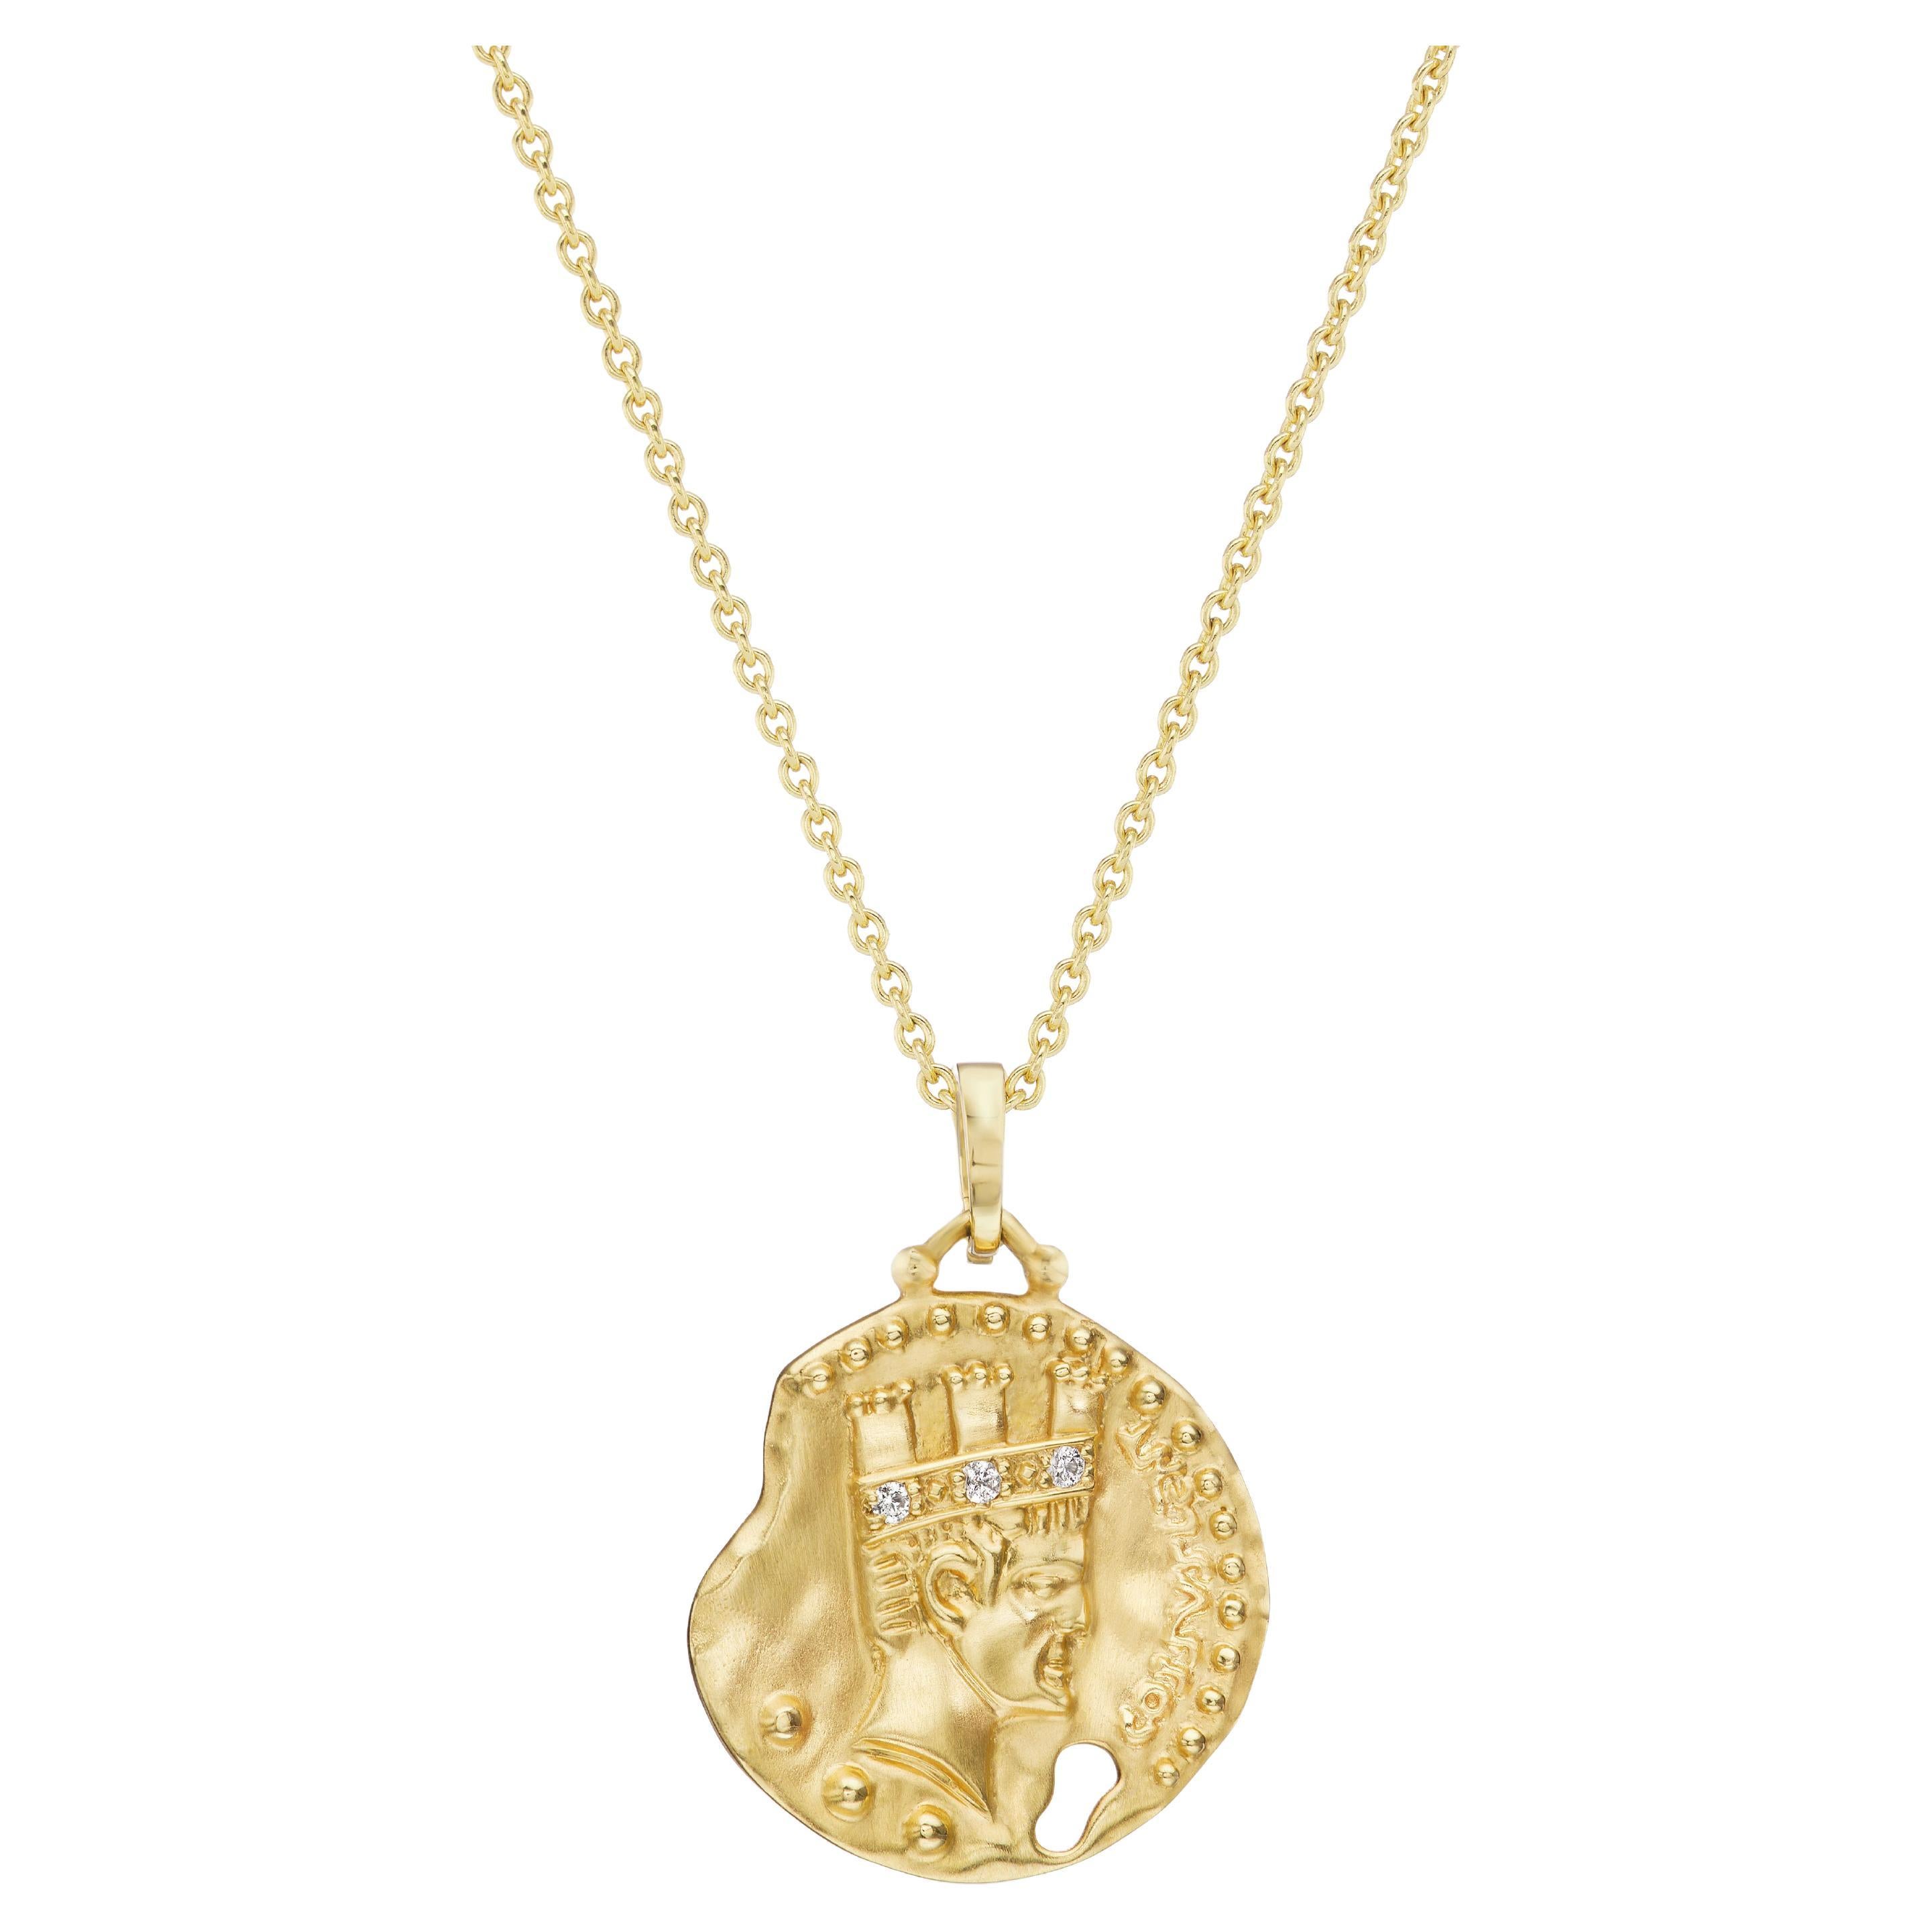 Naval Crown Coin Necklace For Sale